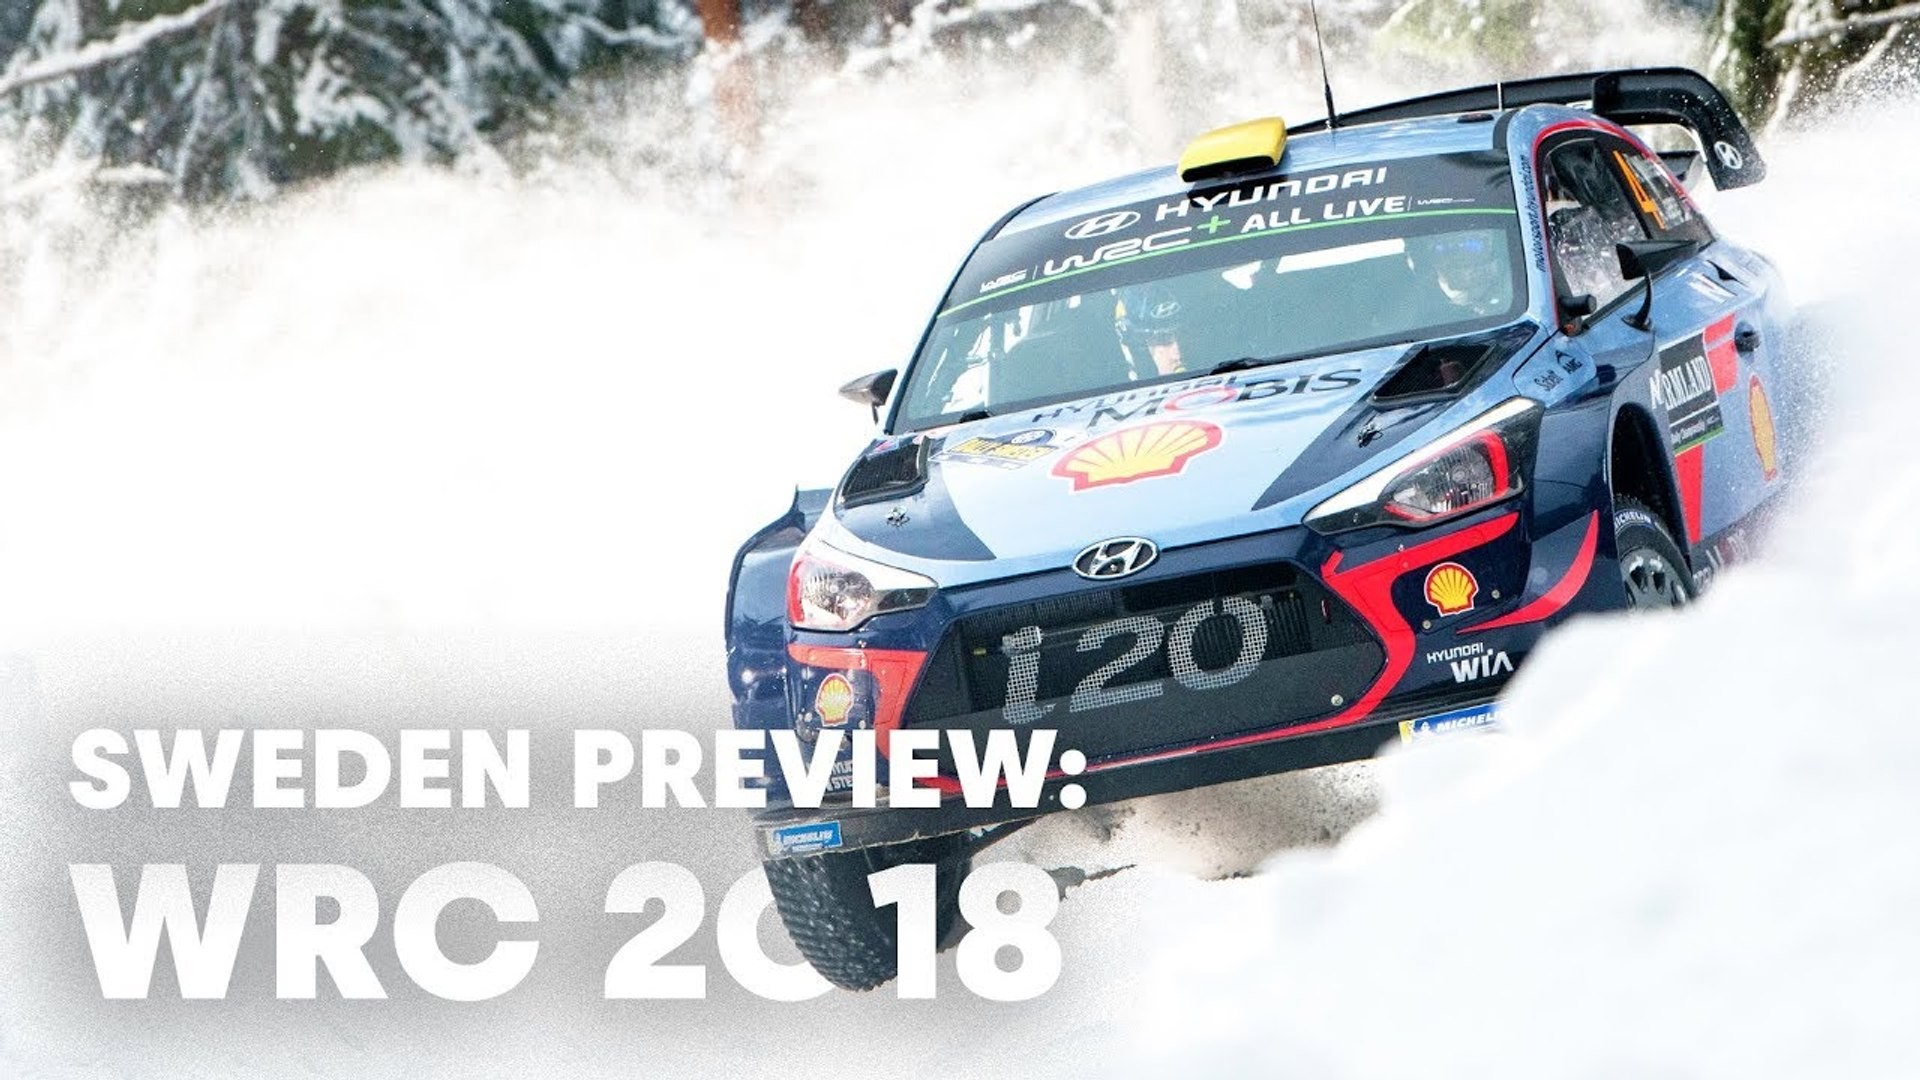 1920x1080 Snow, Ice and Jumps: preview the Swedish Winter Wonderland. | WRC 2018 -  video dailymotion